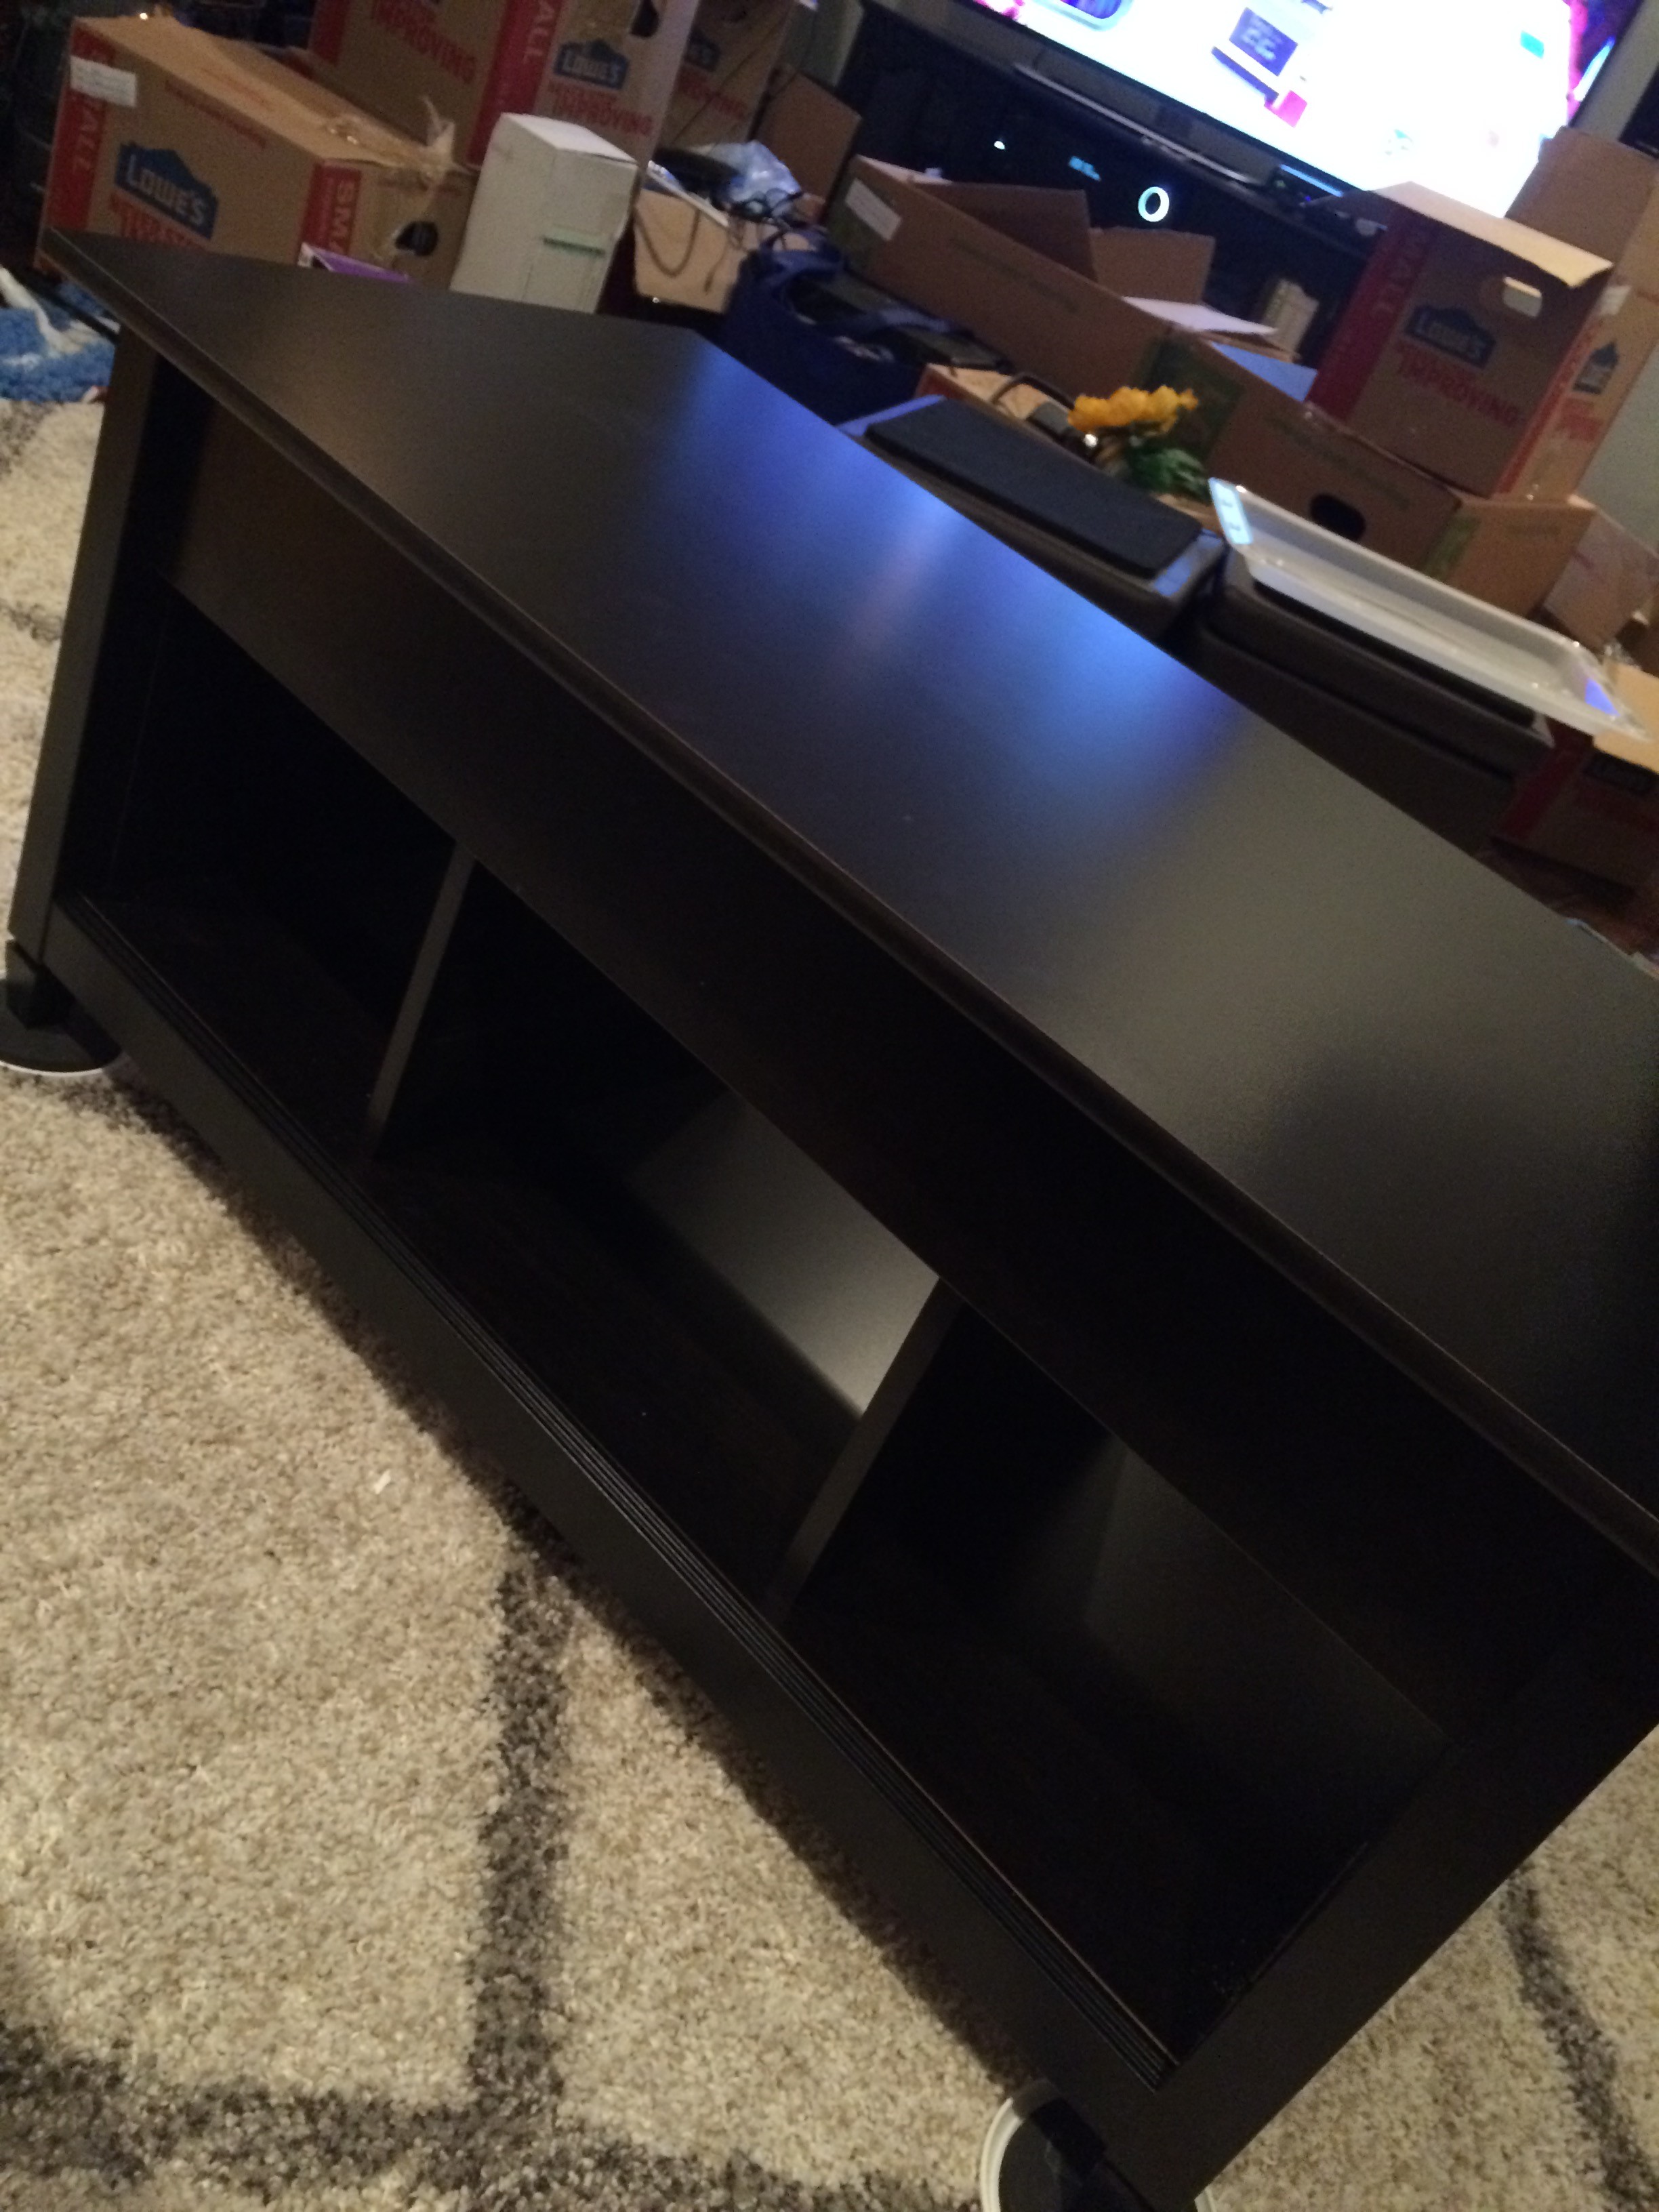 New retractable coffee table from Amazon